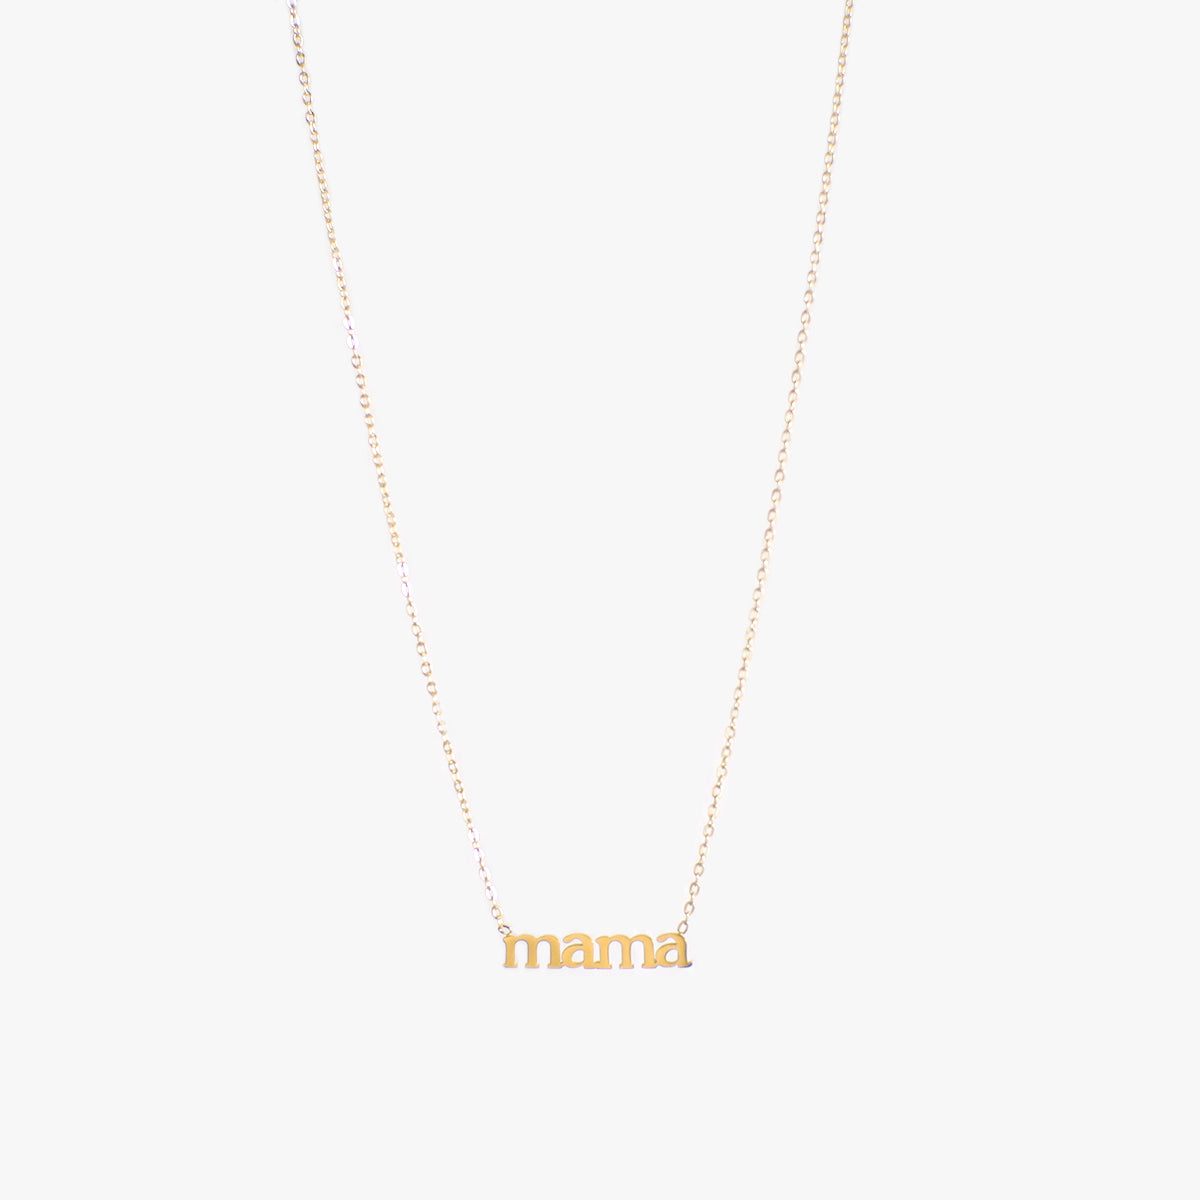 For Mama Necklace